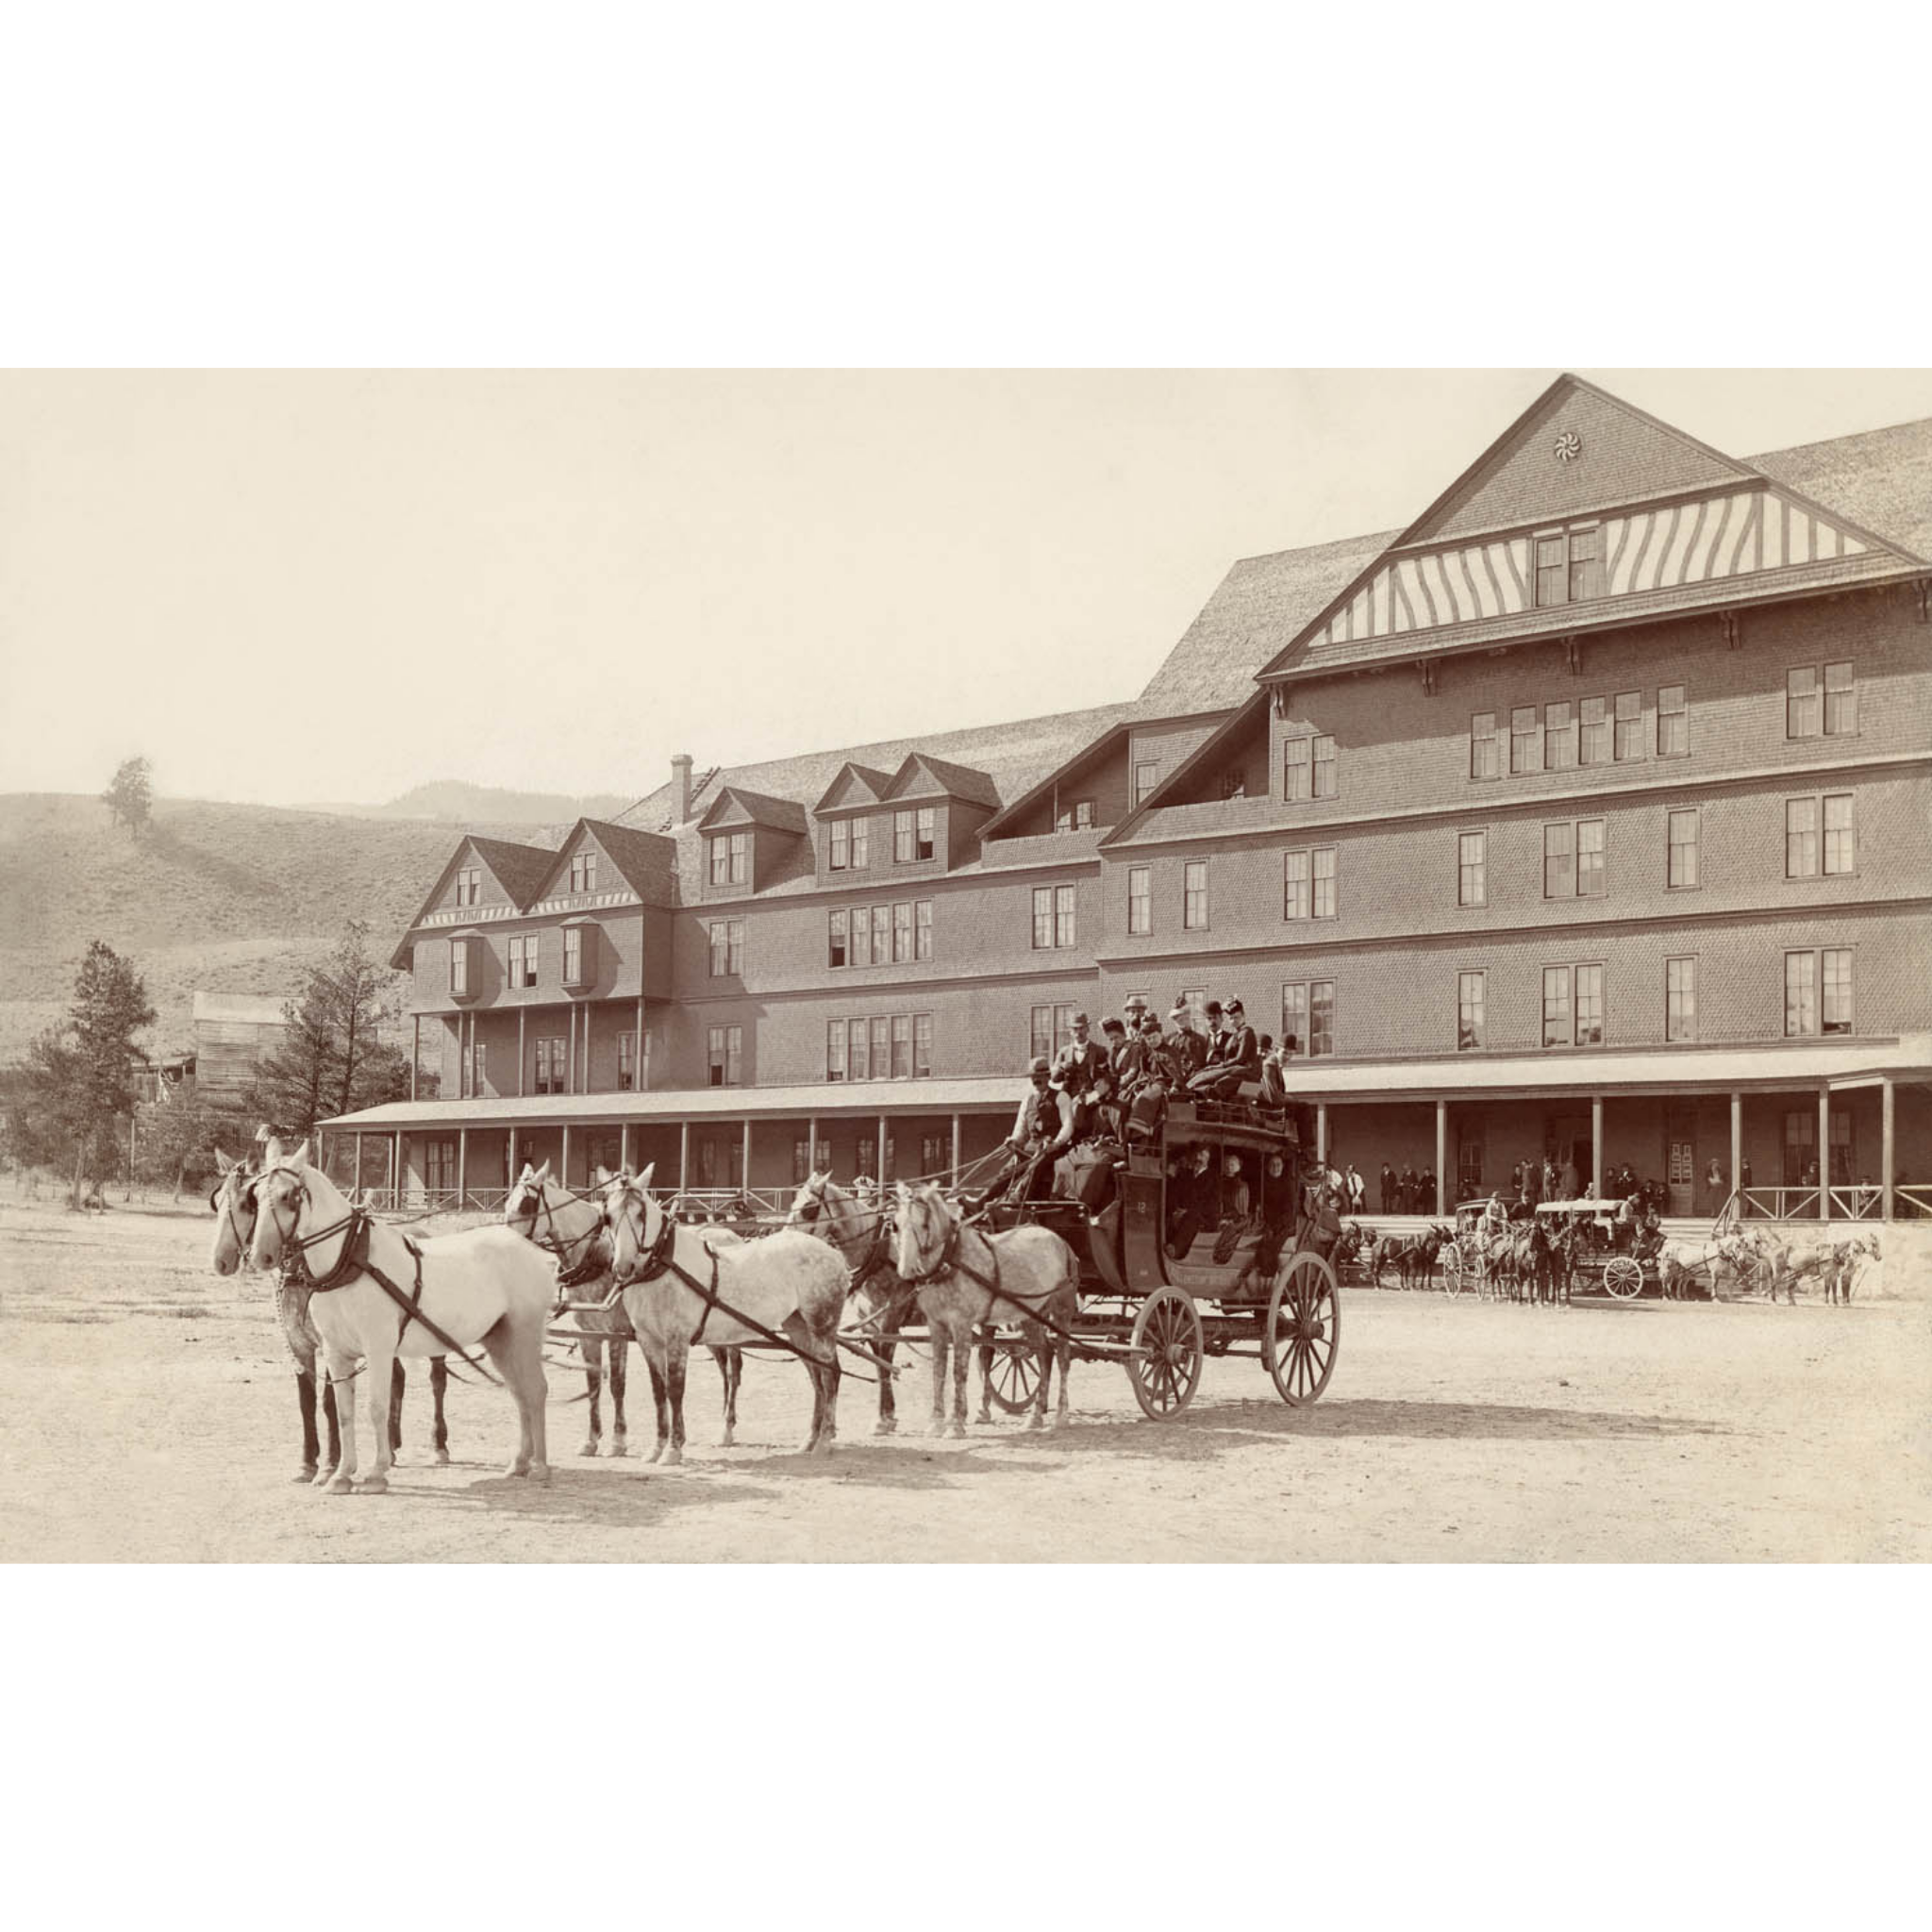 Mammoth Hot Springs Hotel and Coaches - ca. 1890 Albumen Photo